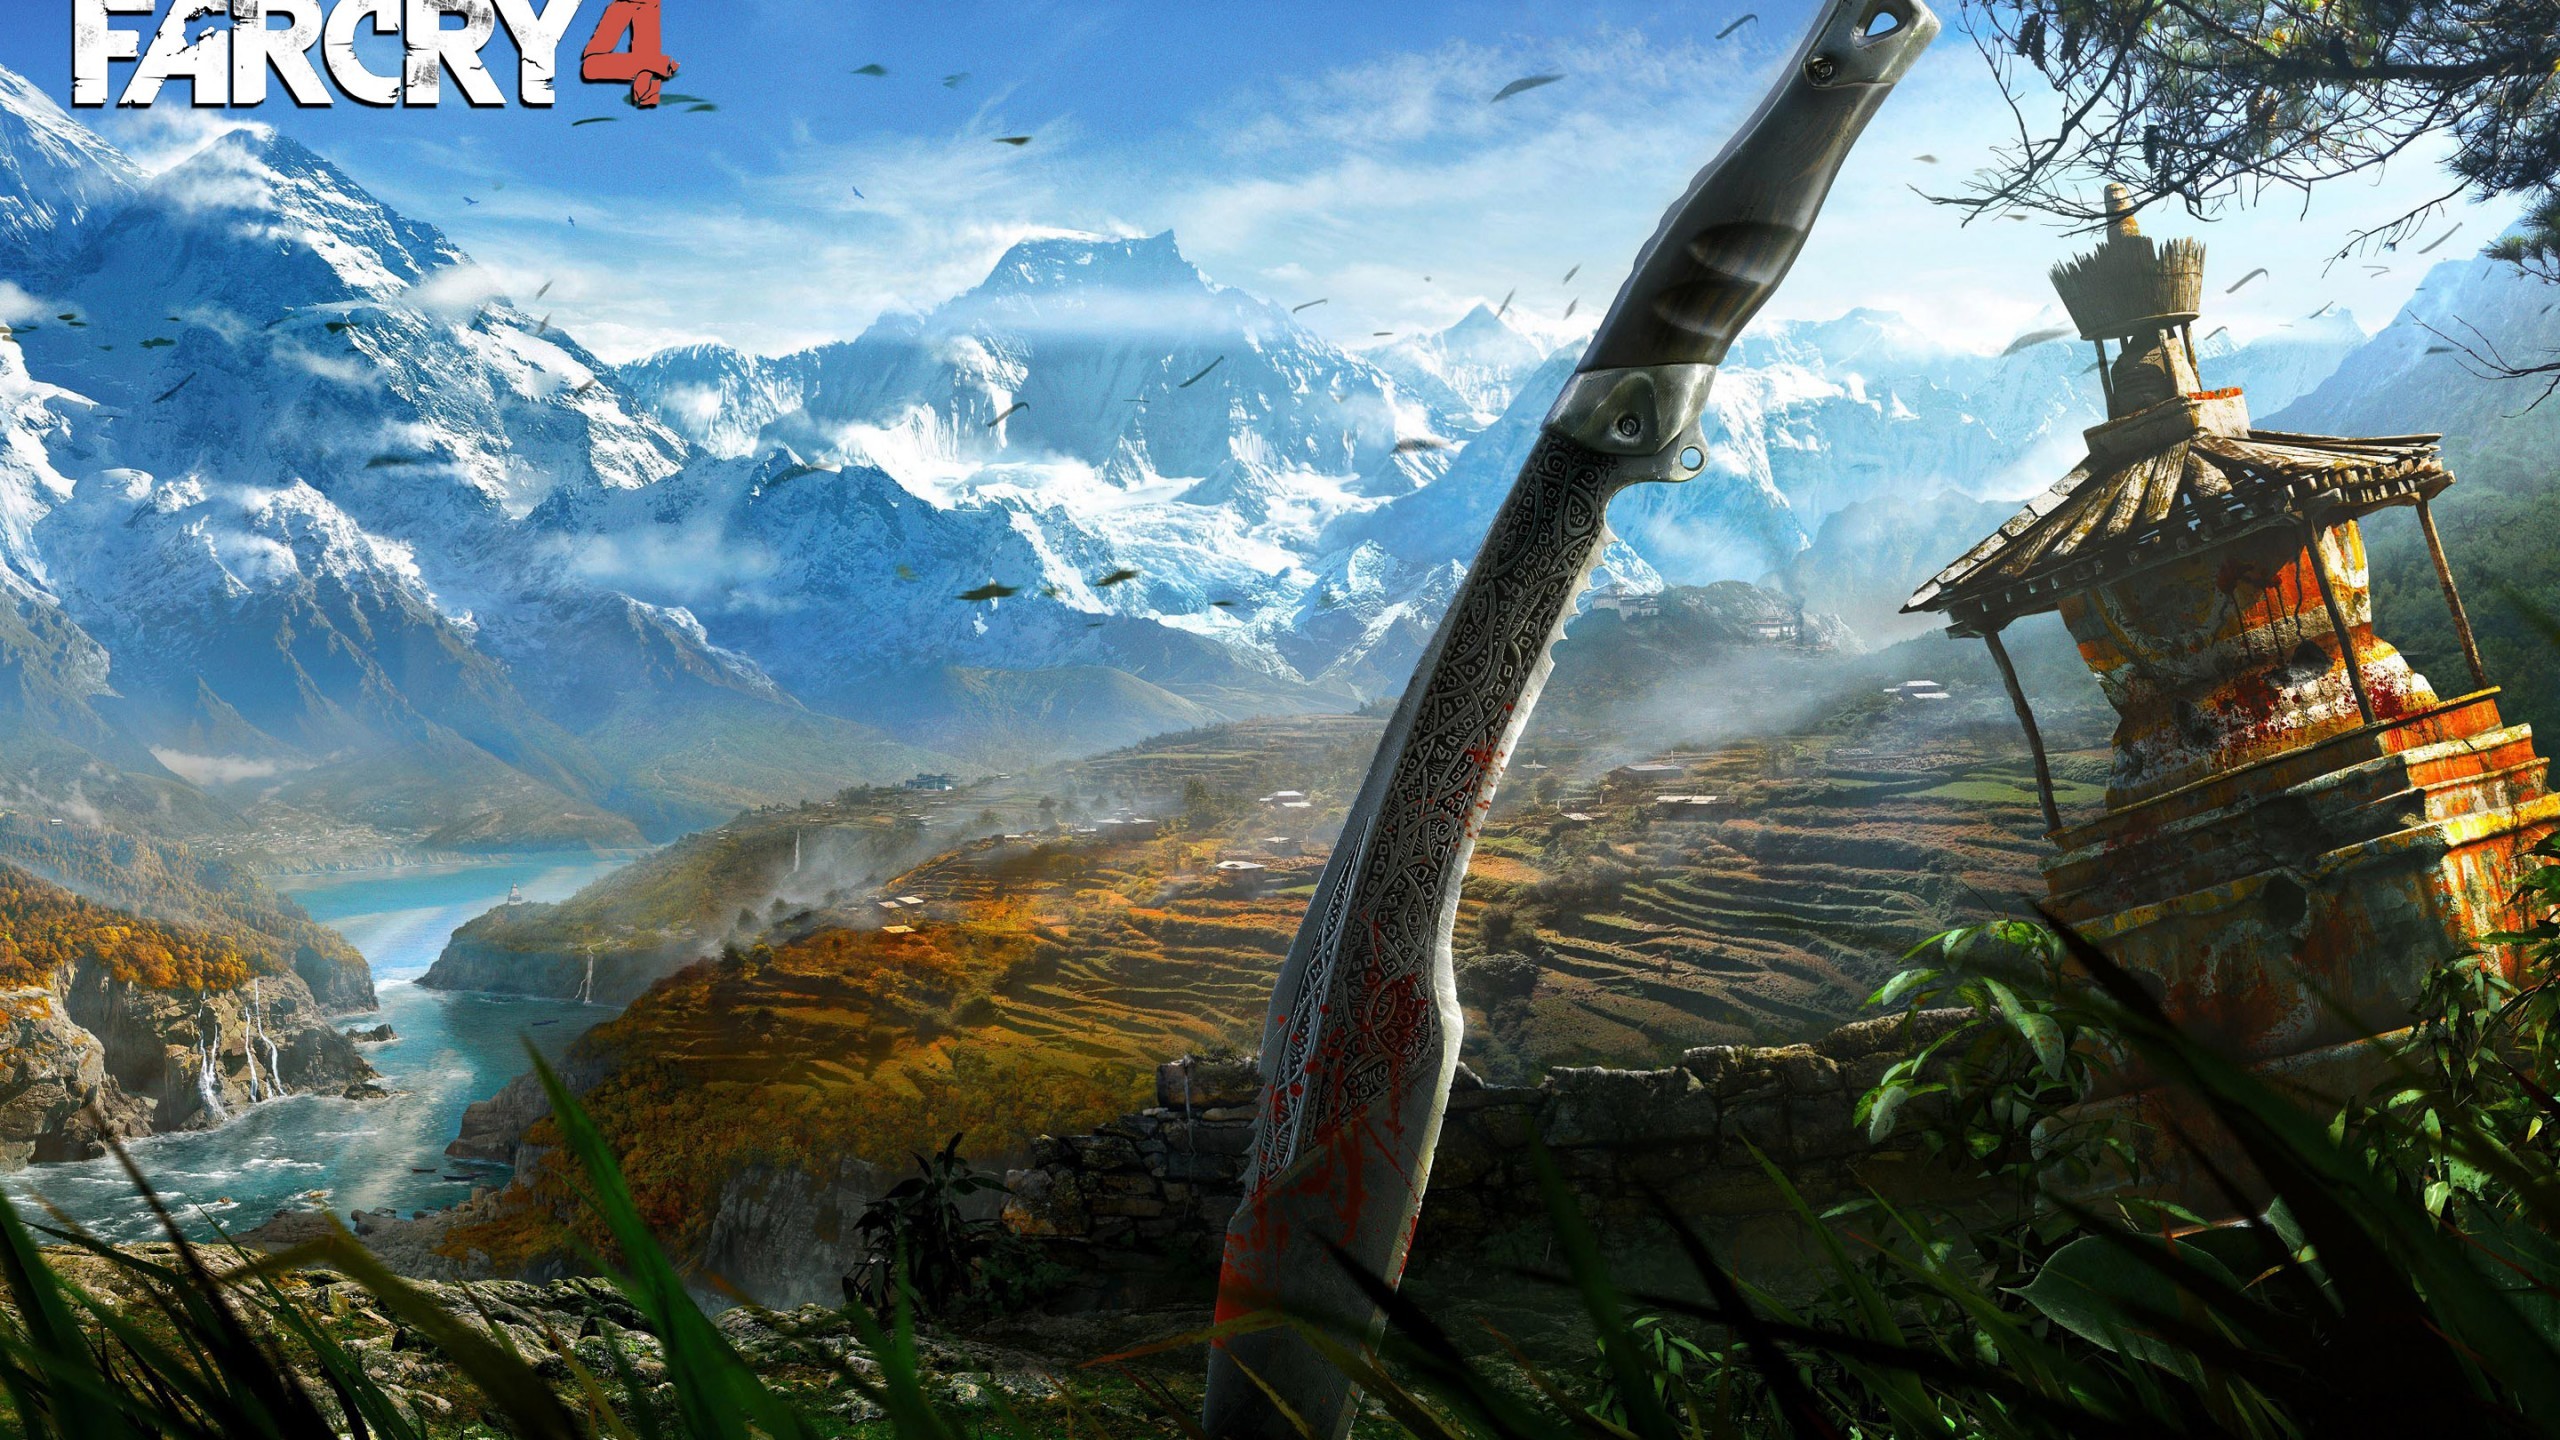 2560x1440 Far Cry 4 Poster, vanquish,  HD Wallpaper and FREE Stock .